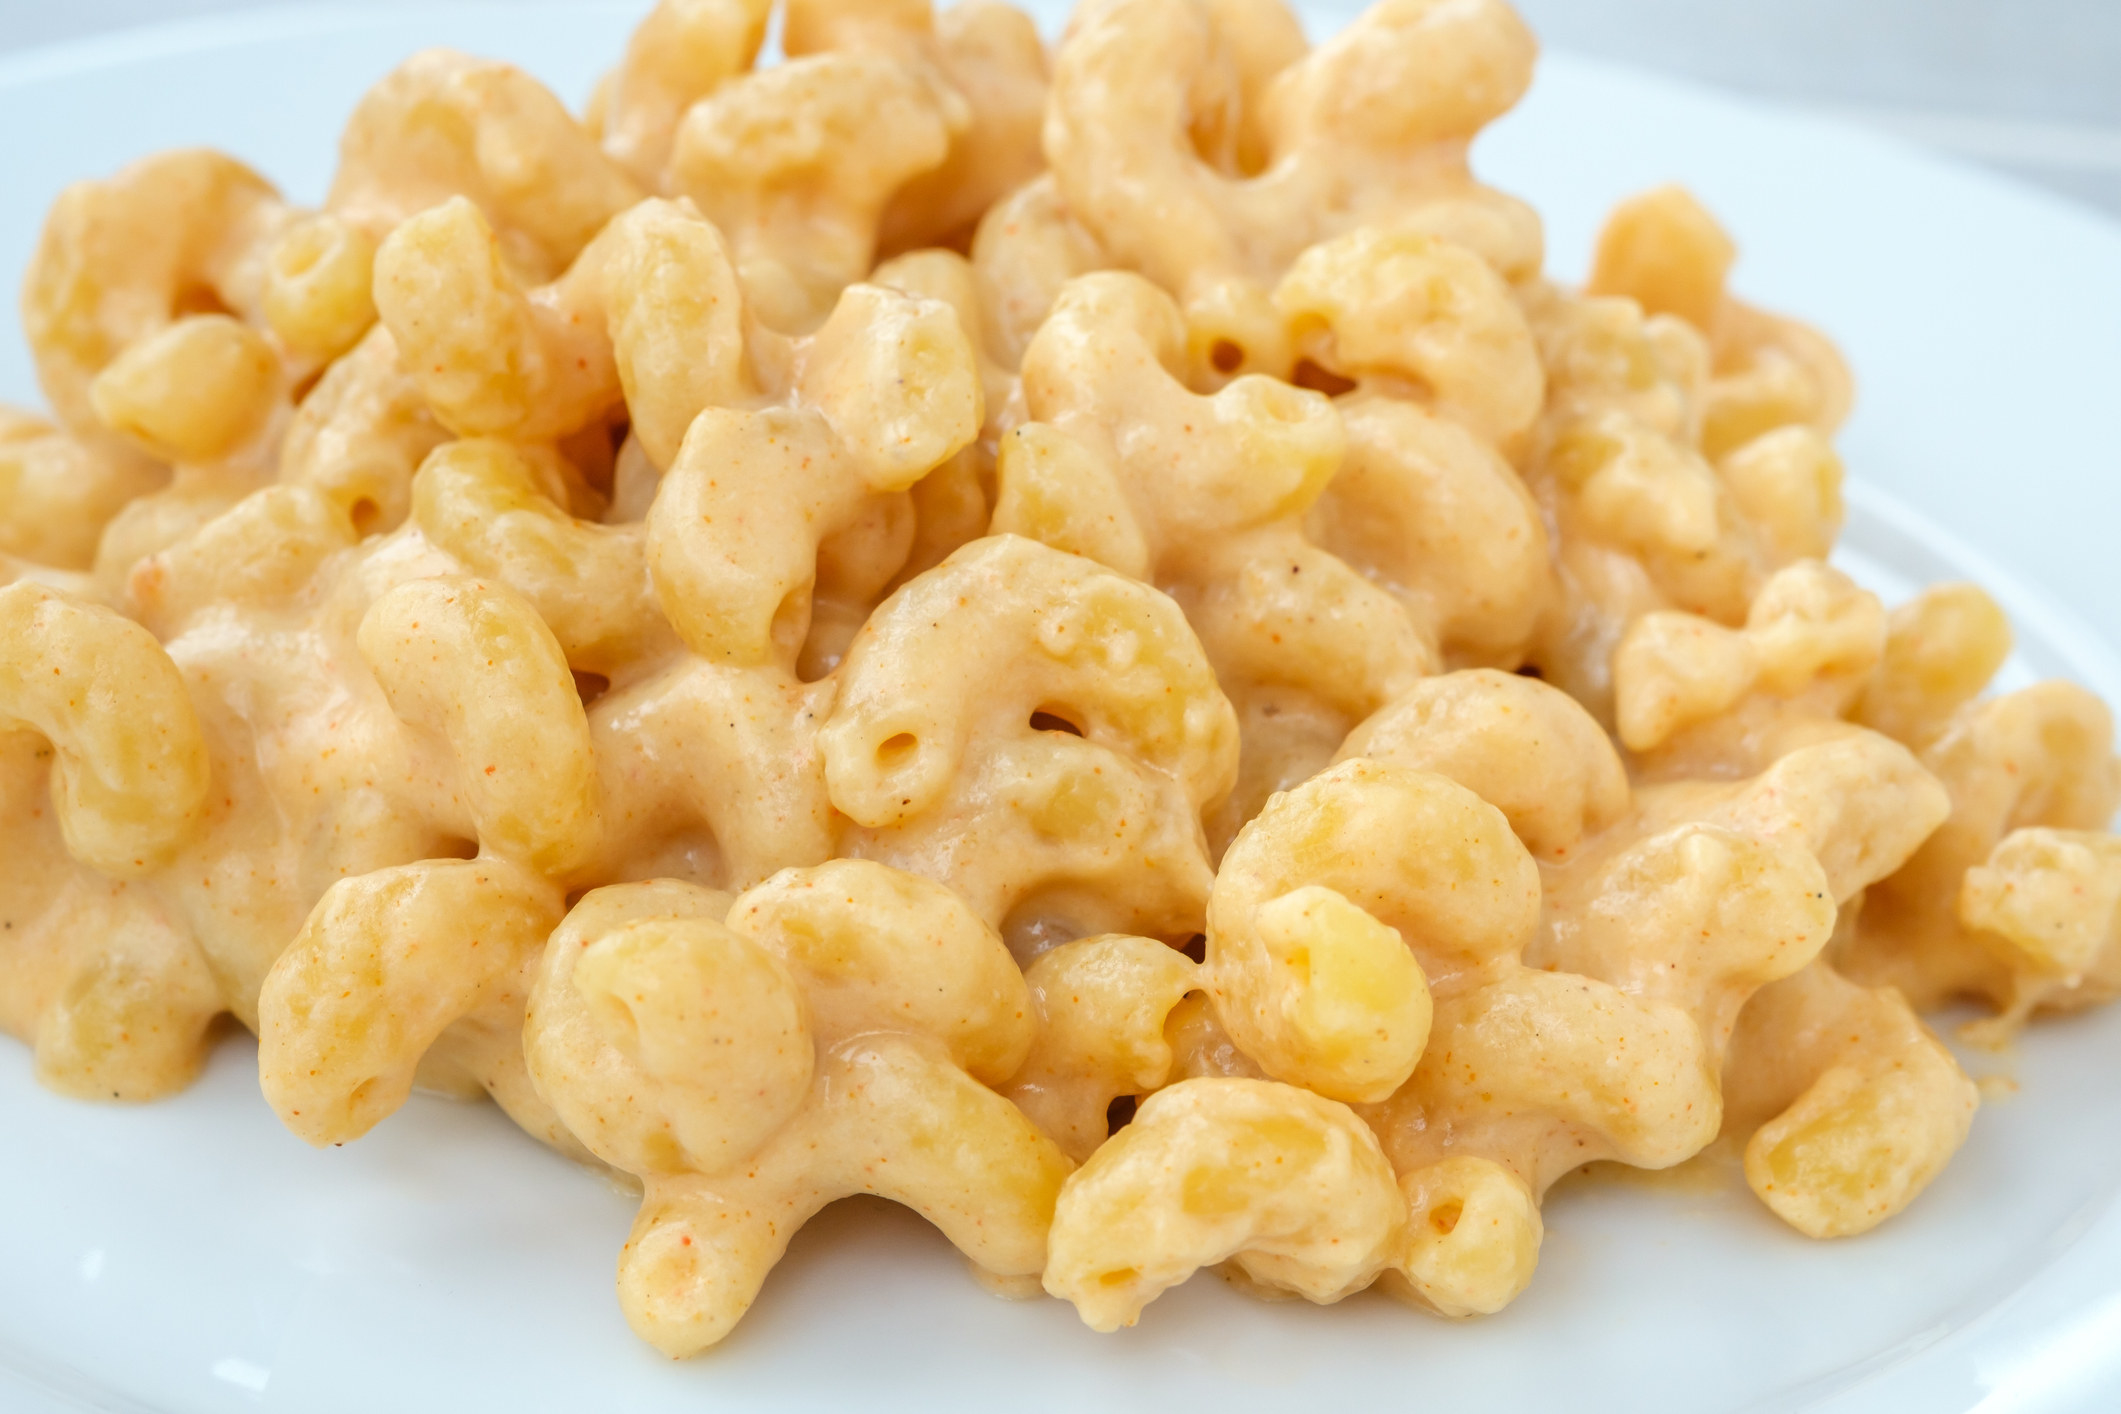 Portion of macaroni and cheese on a plate